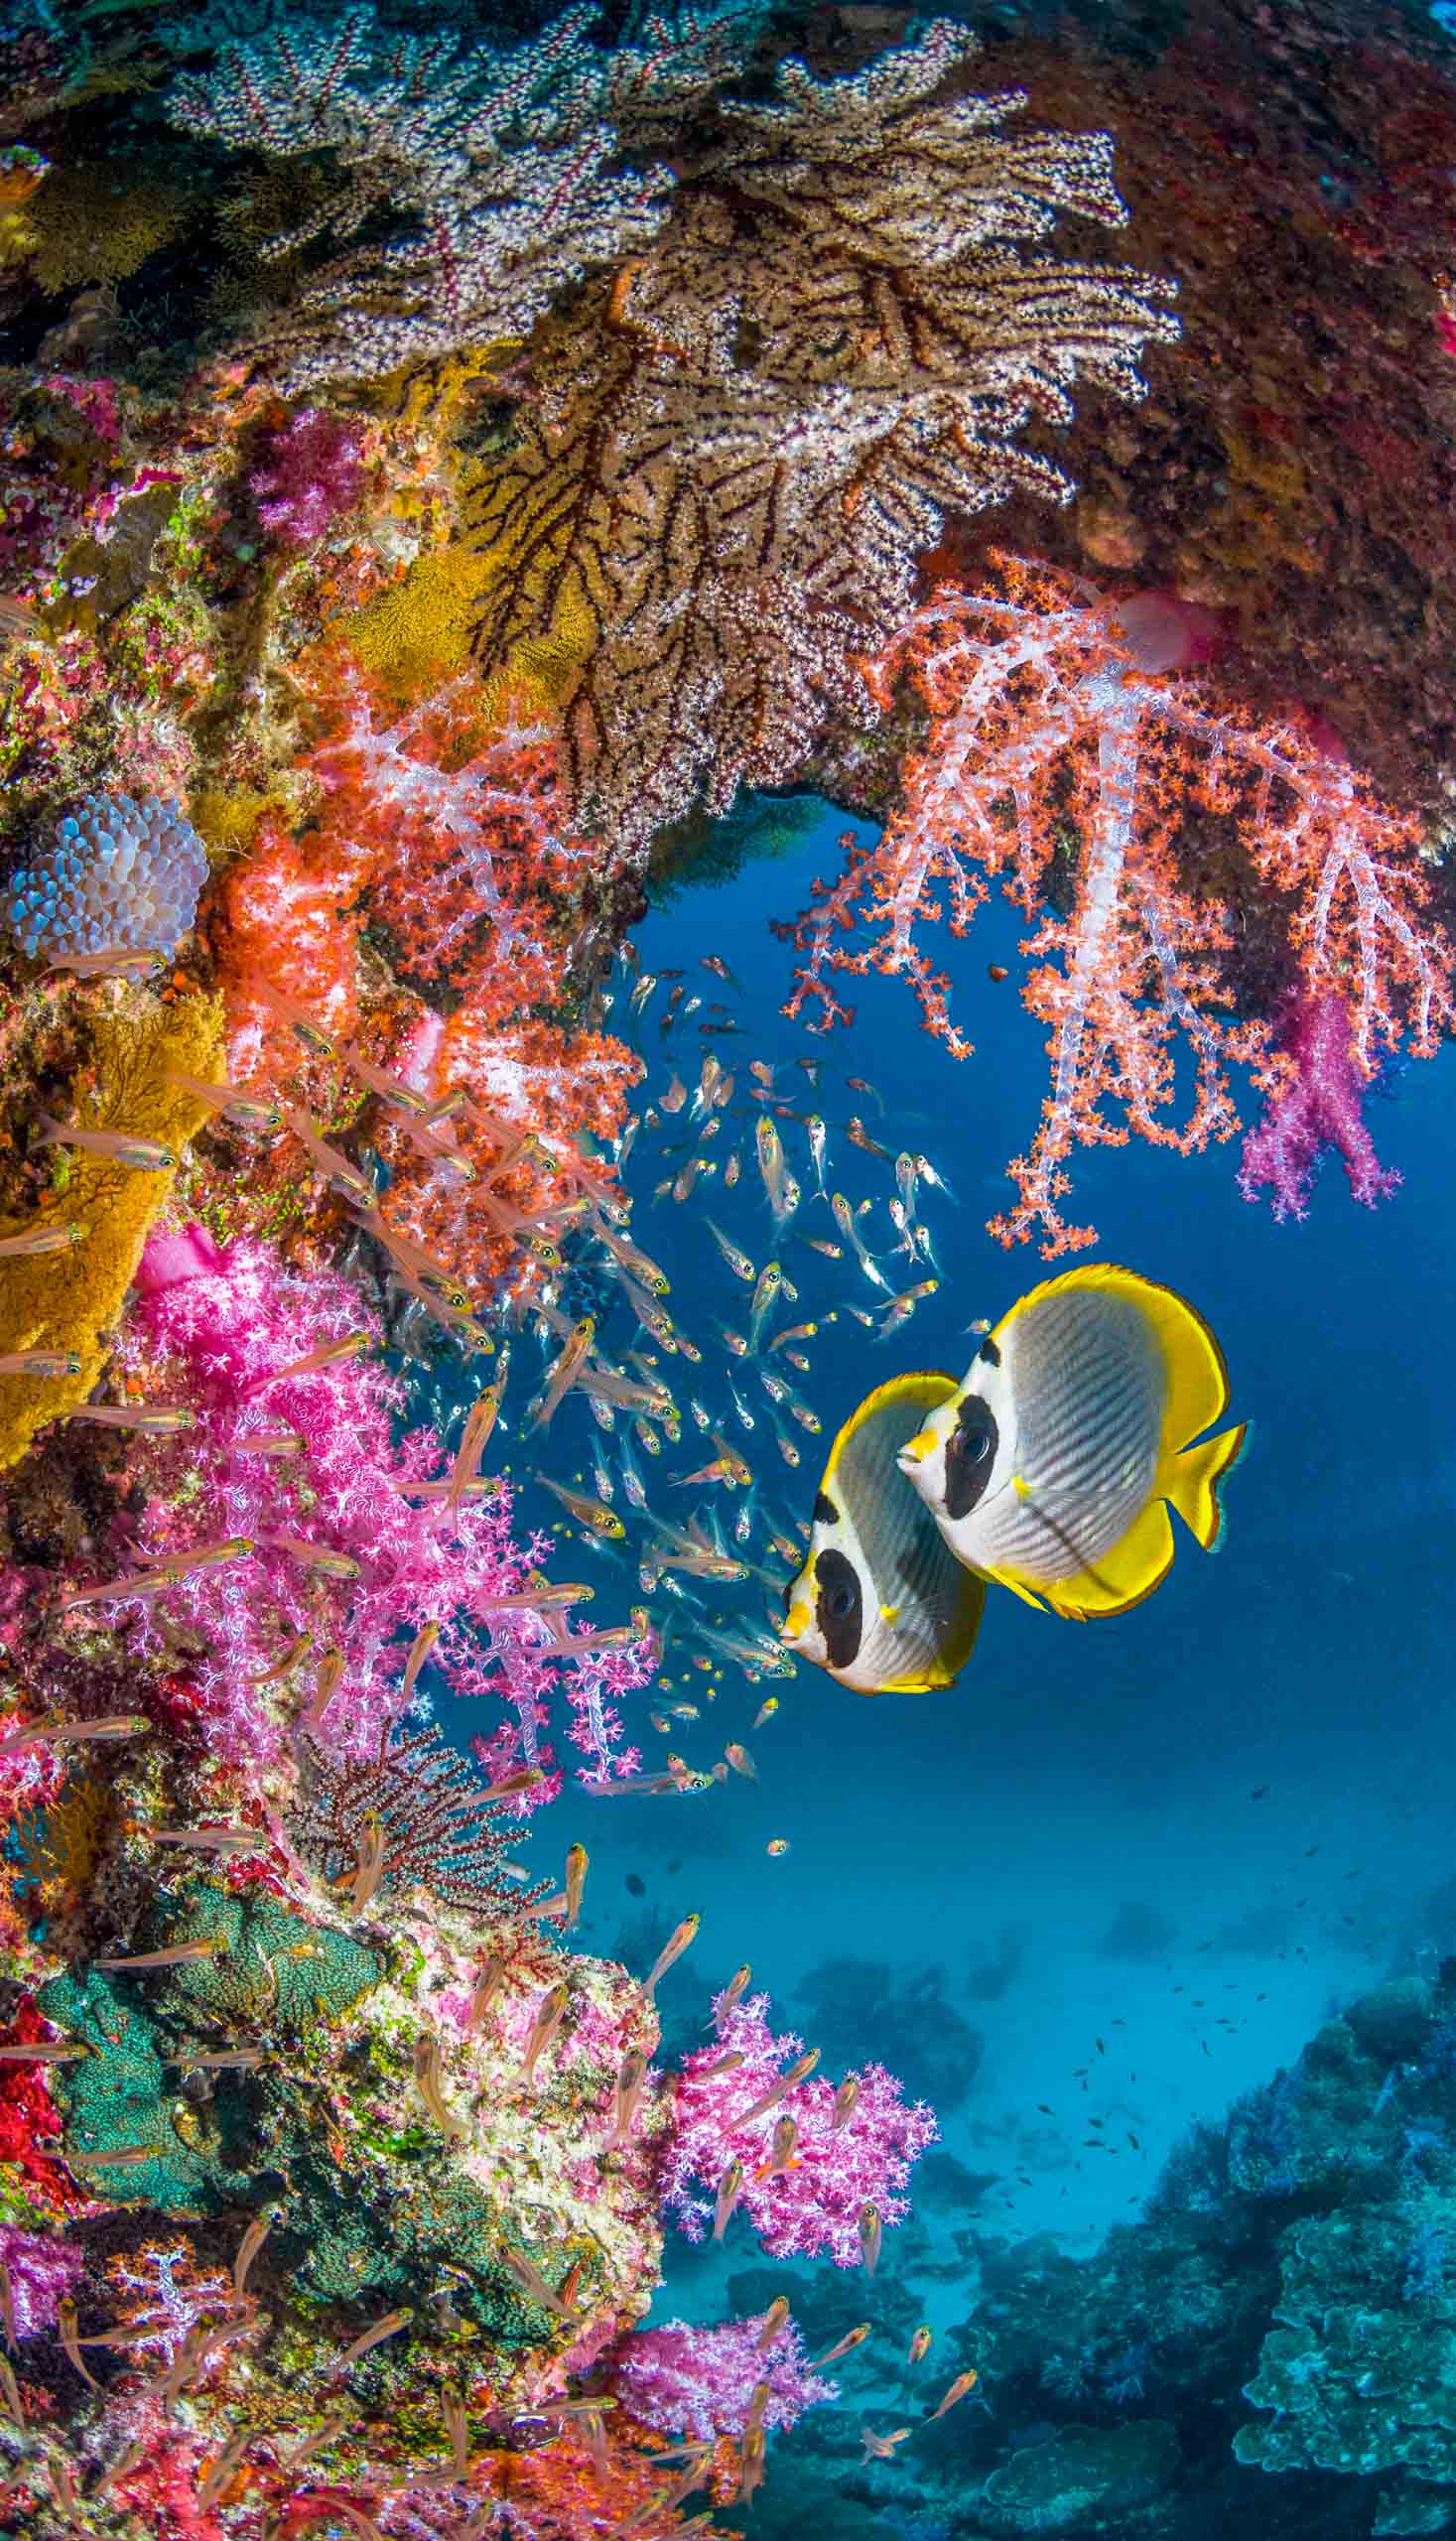 Two fish alongside a coral reef in Raja Ampat.